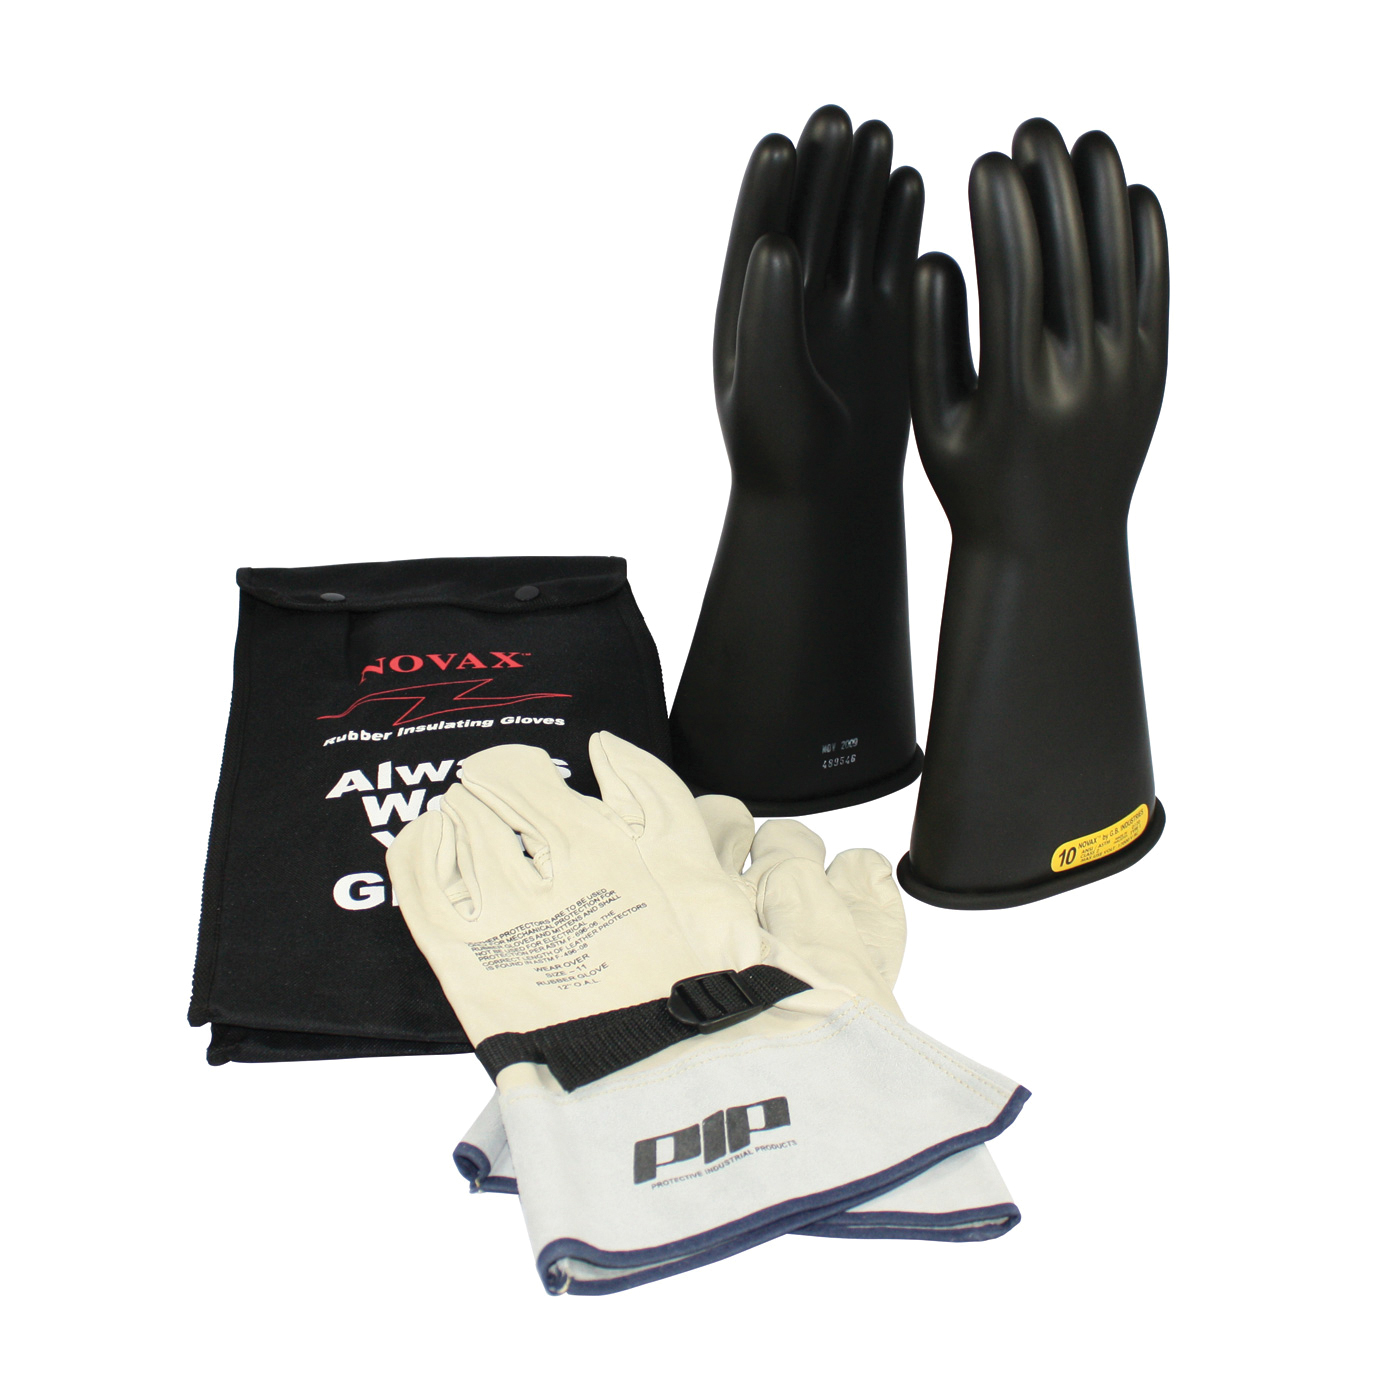 Novax® 150-SK-2/10-KIT Insulating Unisex Electrical Safety Gloves Kit, SZ 10, Cowhide Leather/Natural Rubber, Black/Natural, 14 in L, ASTM Class: Class 2, 17000 VAC, 25500 VDC Max Use Voltage